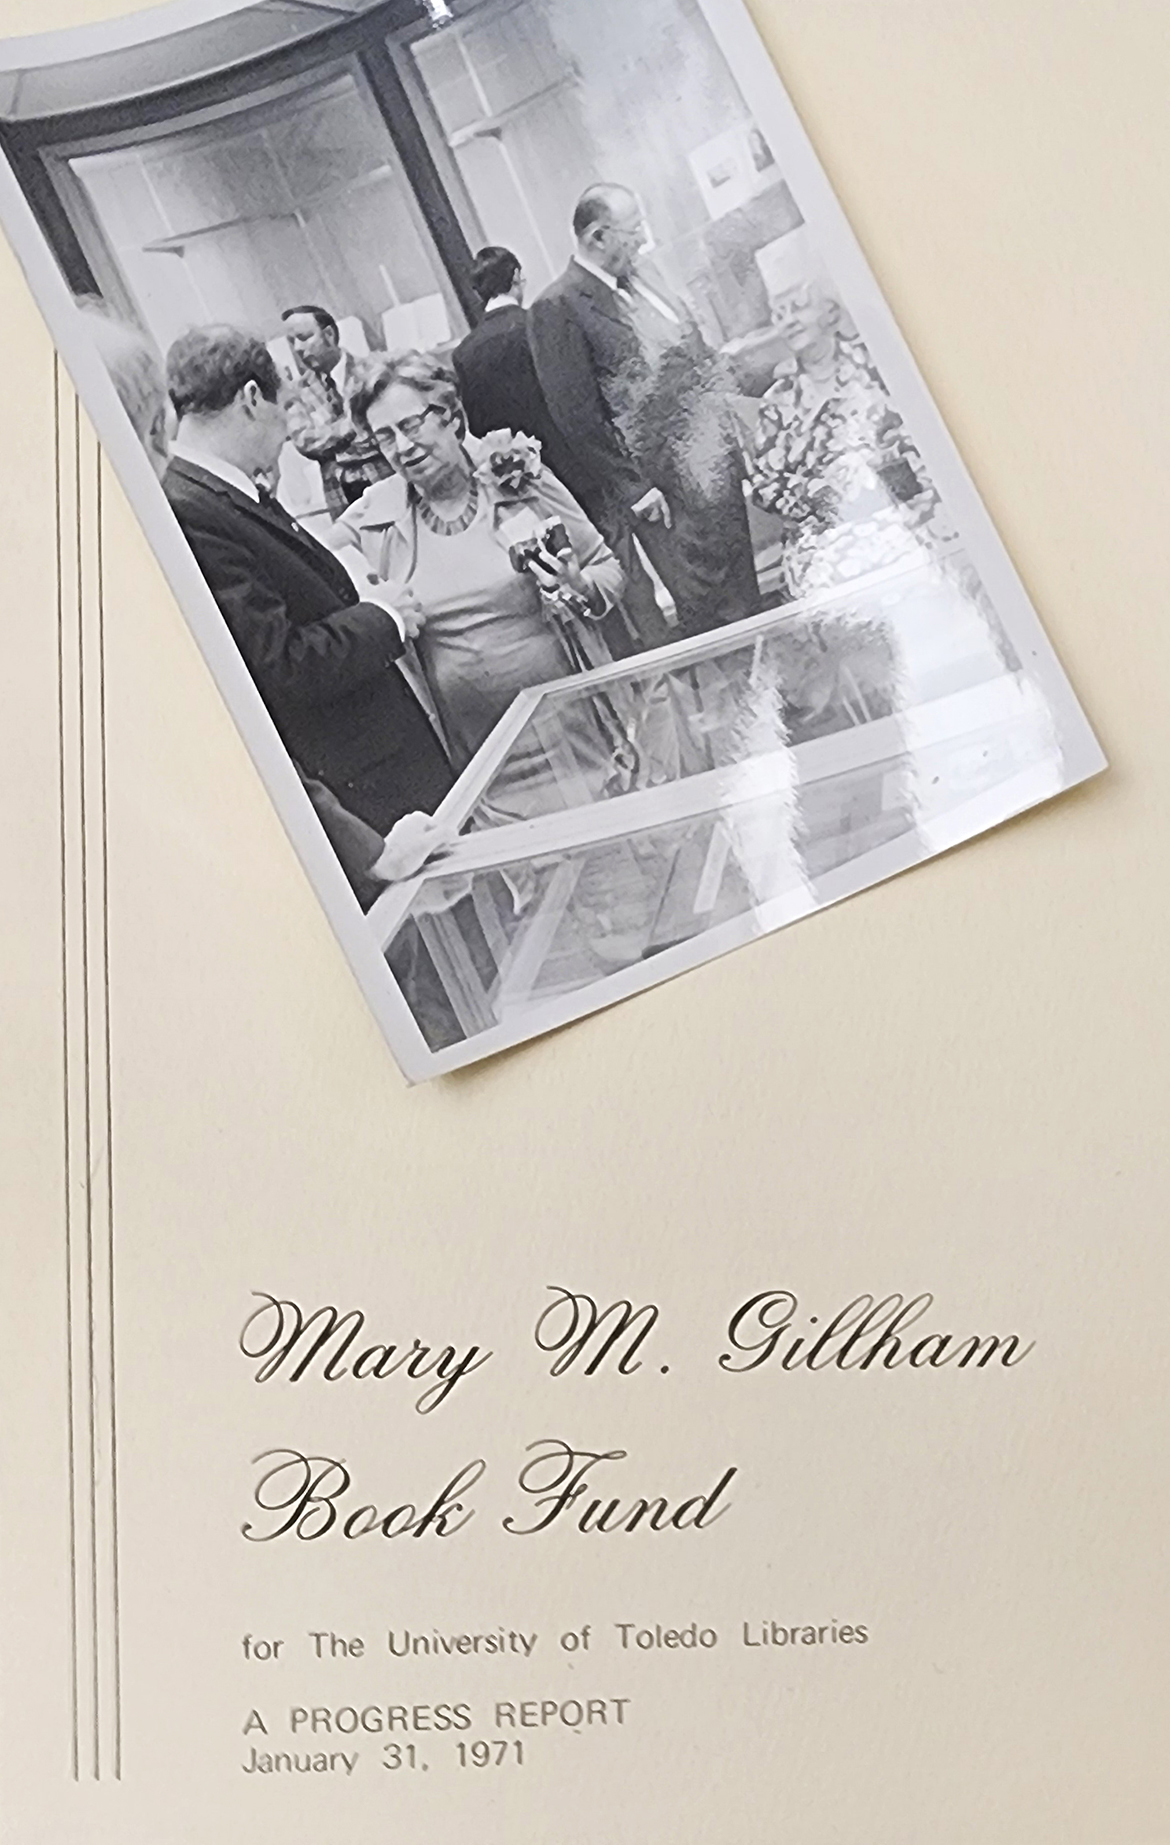 1971 Progress Report of the Mary M. Gillham Book Fund